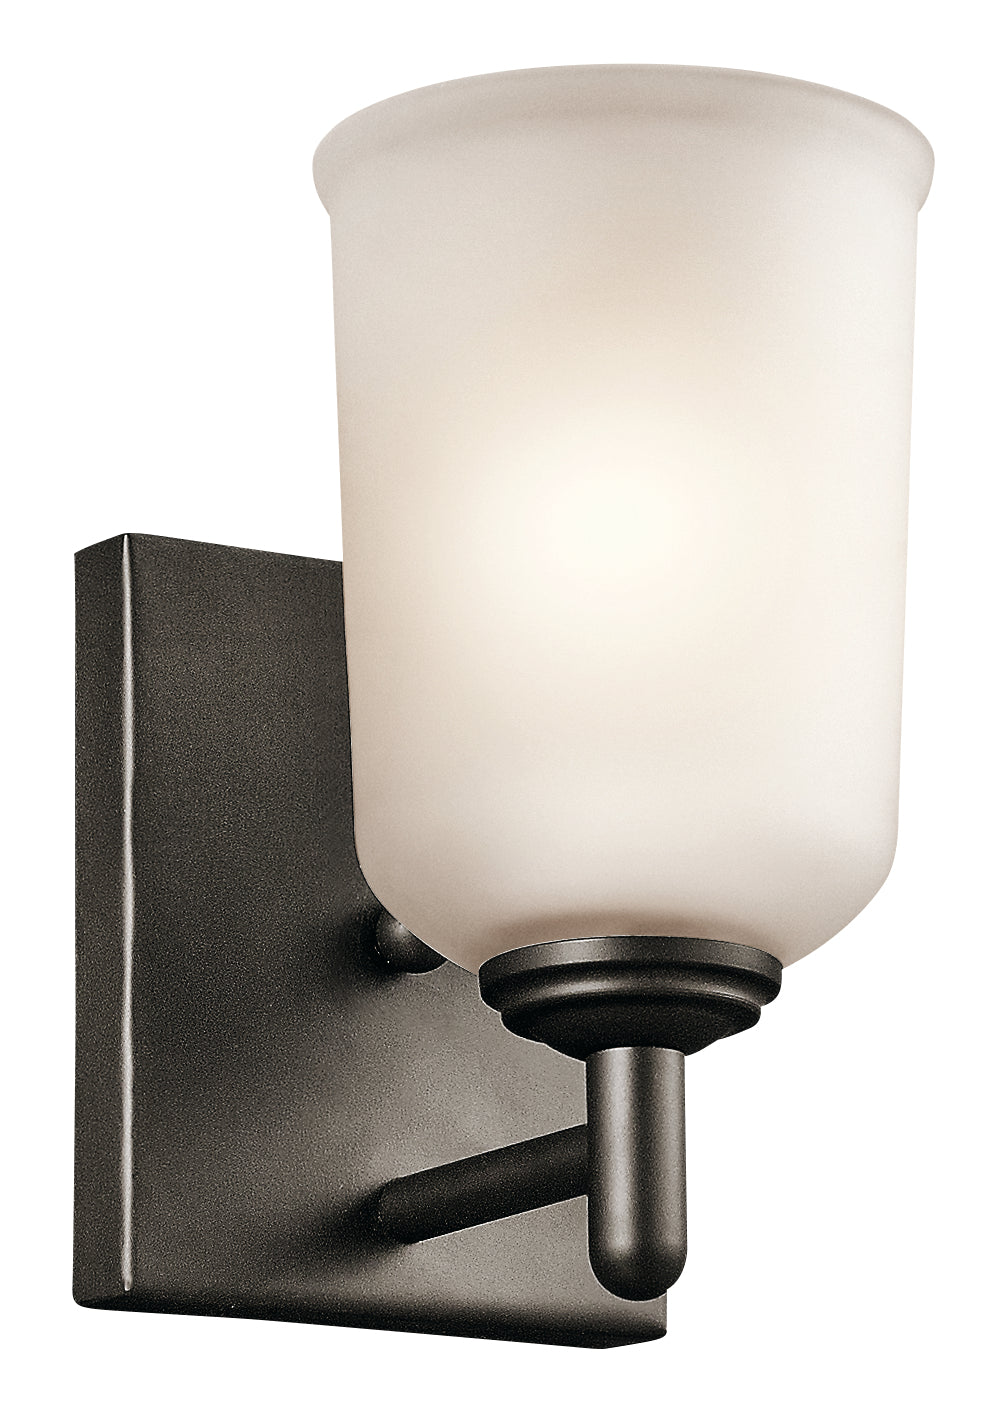 Kichler One Light Wall Sconce